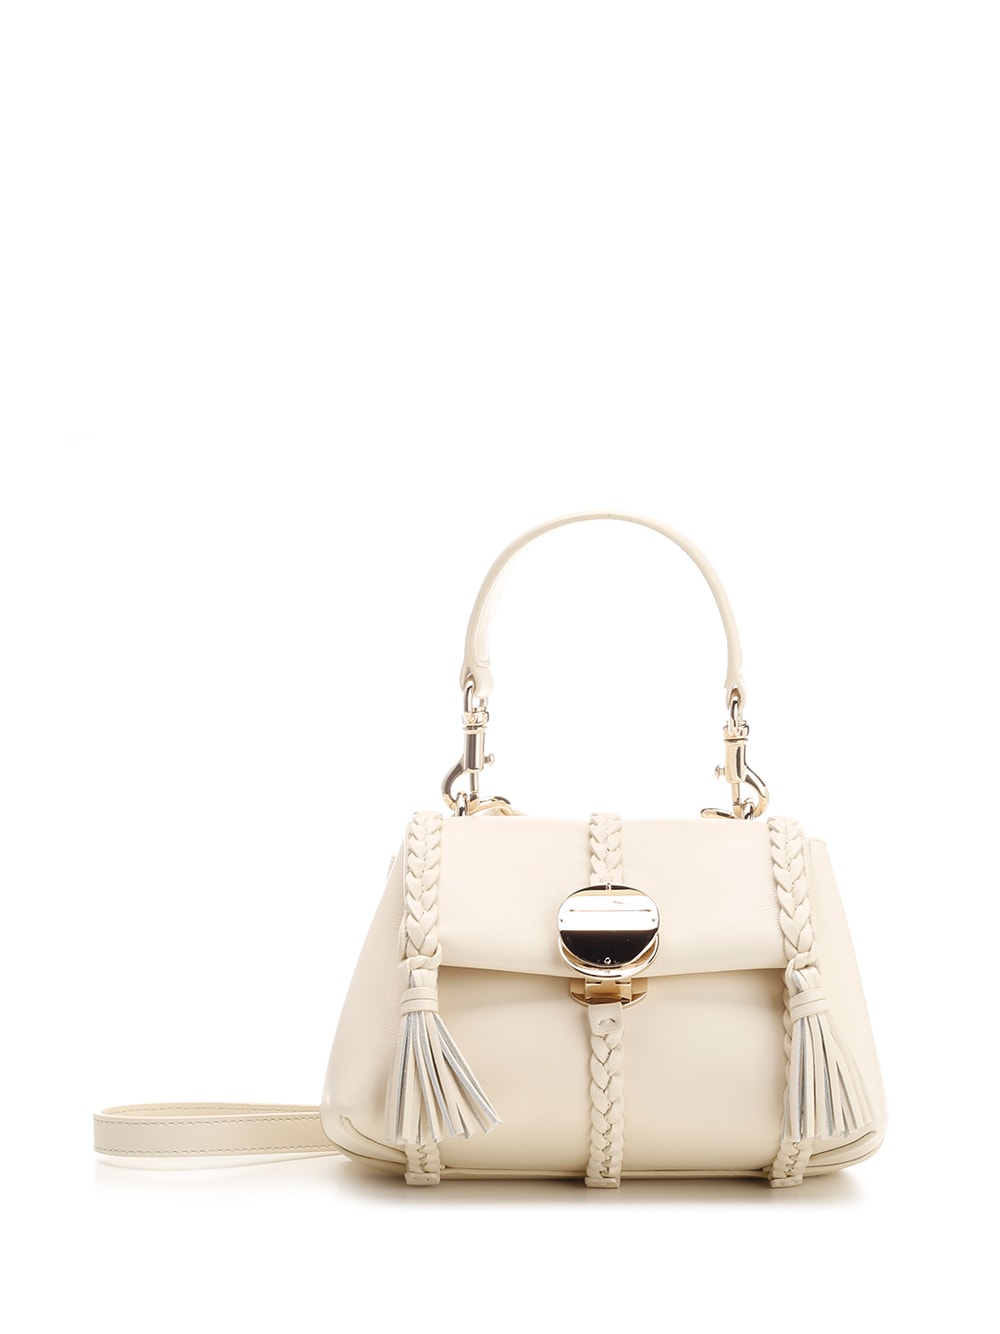 Chloé Penelope Small Handle Bag In Neutral